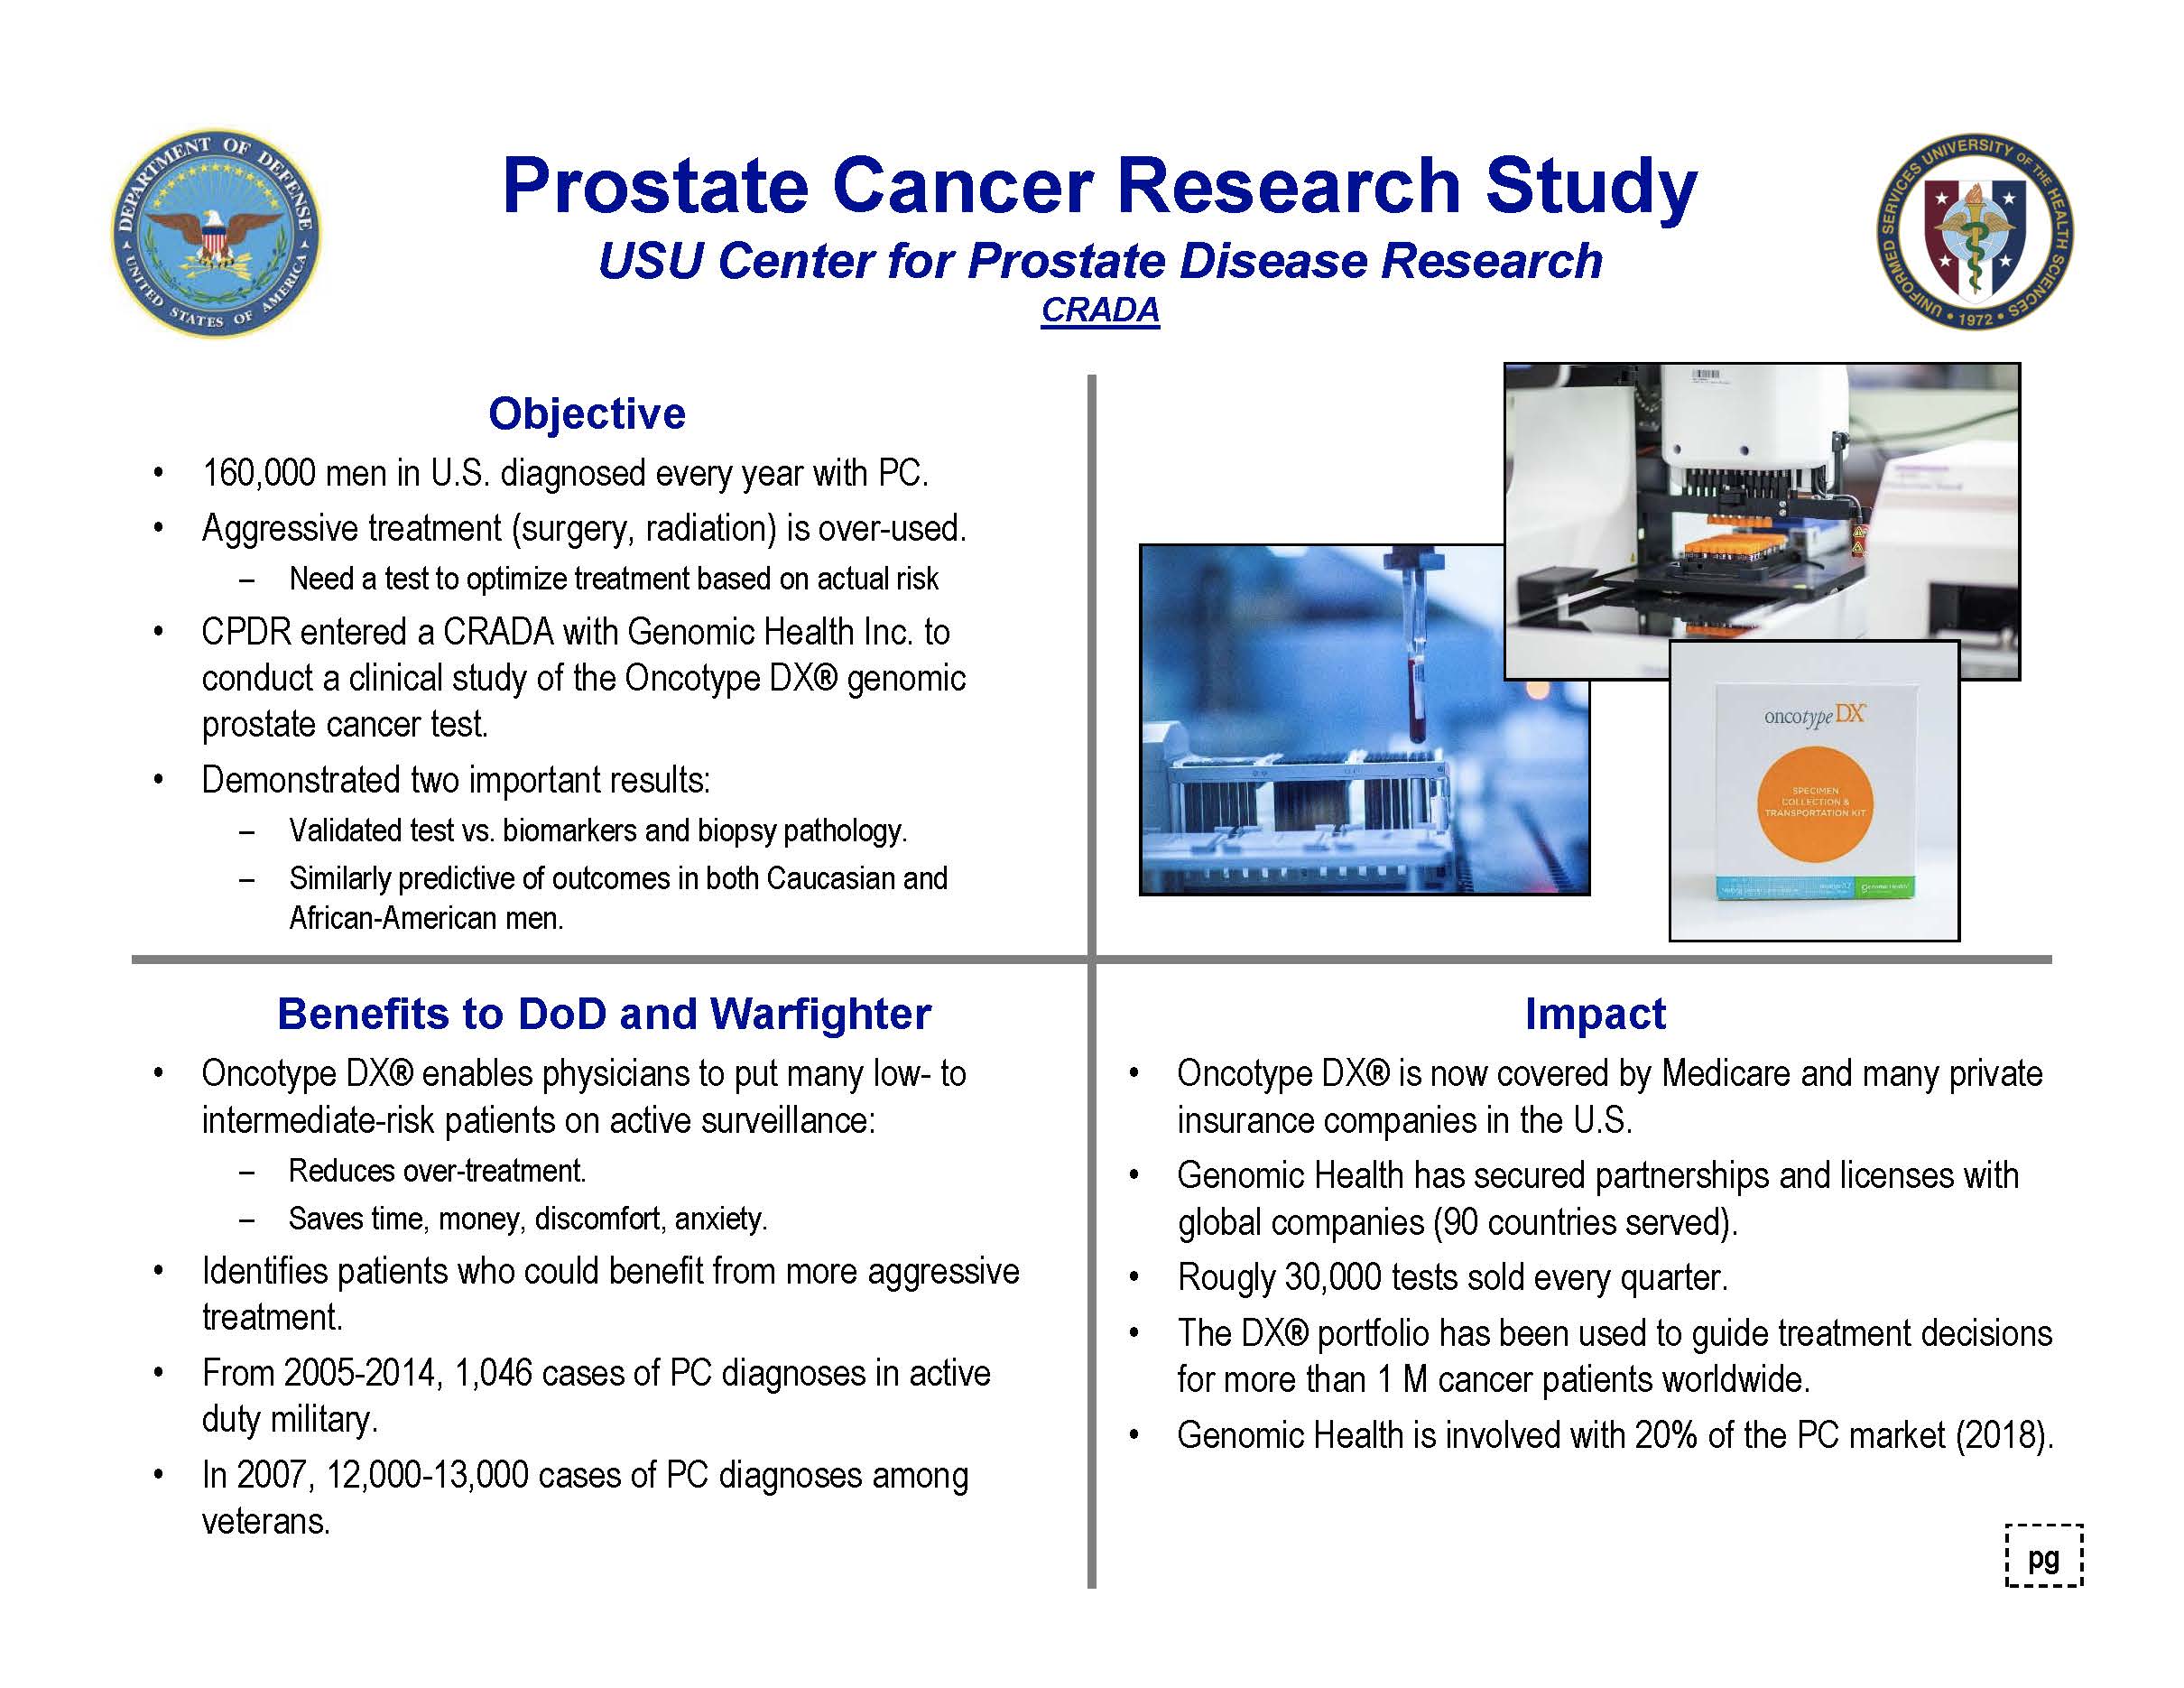 Four quadrant explanation of prostate cancer research study